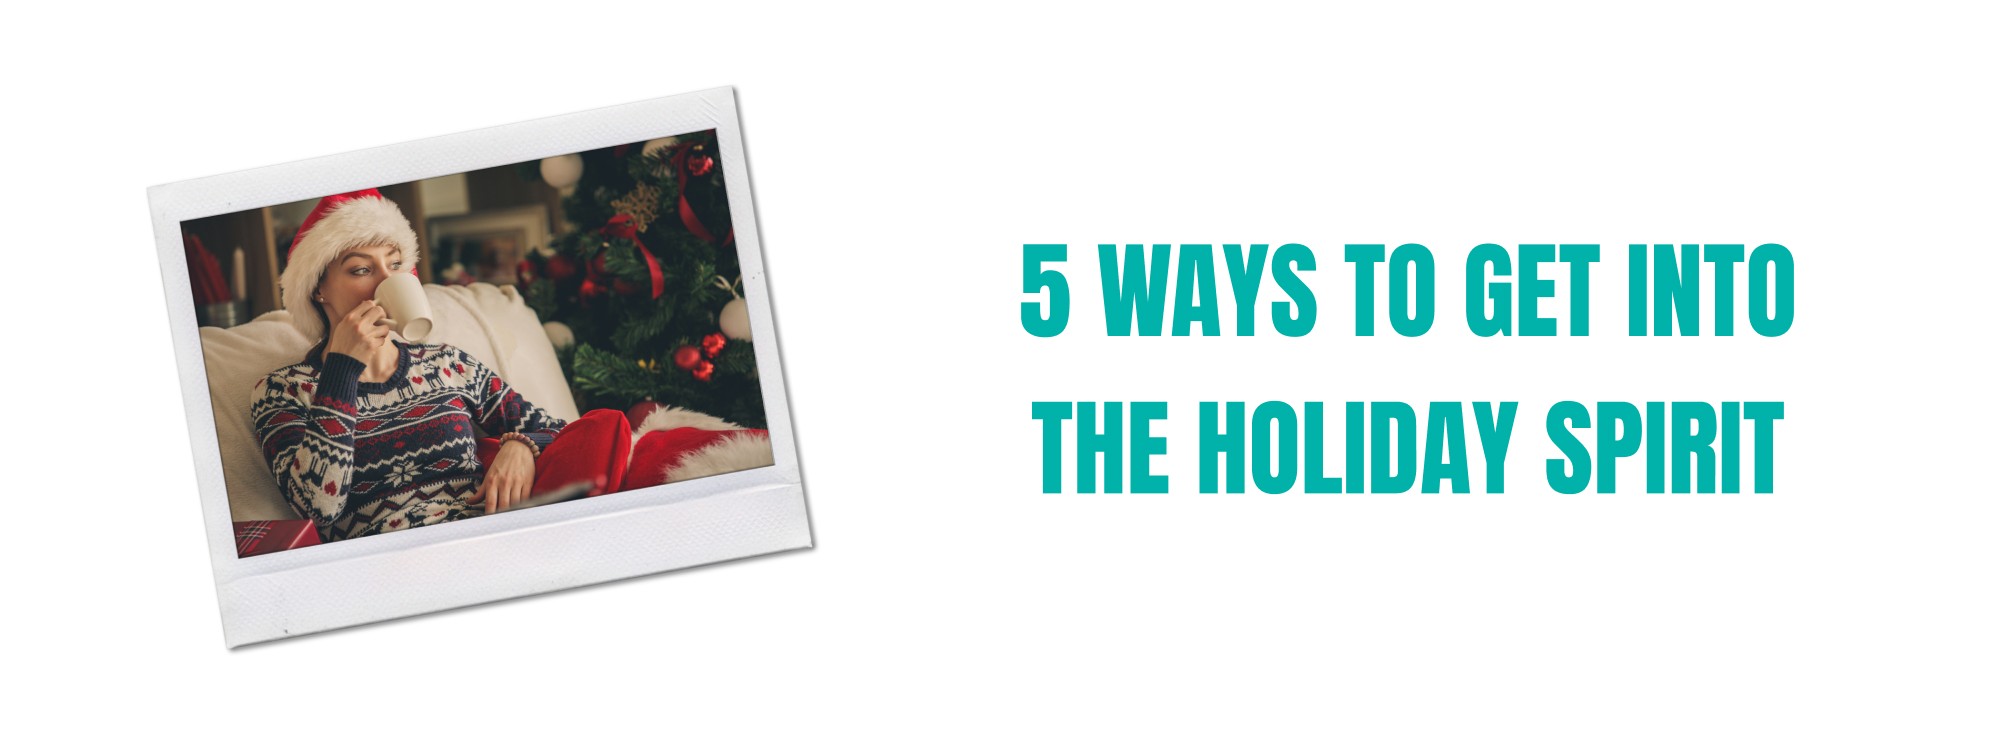 5 Ways to Get Into The Holiday Spirit